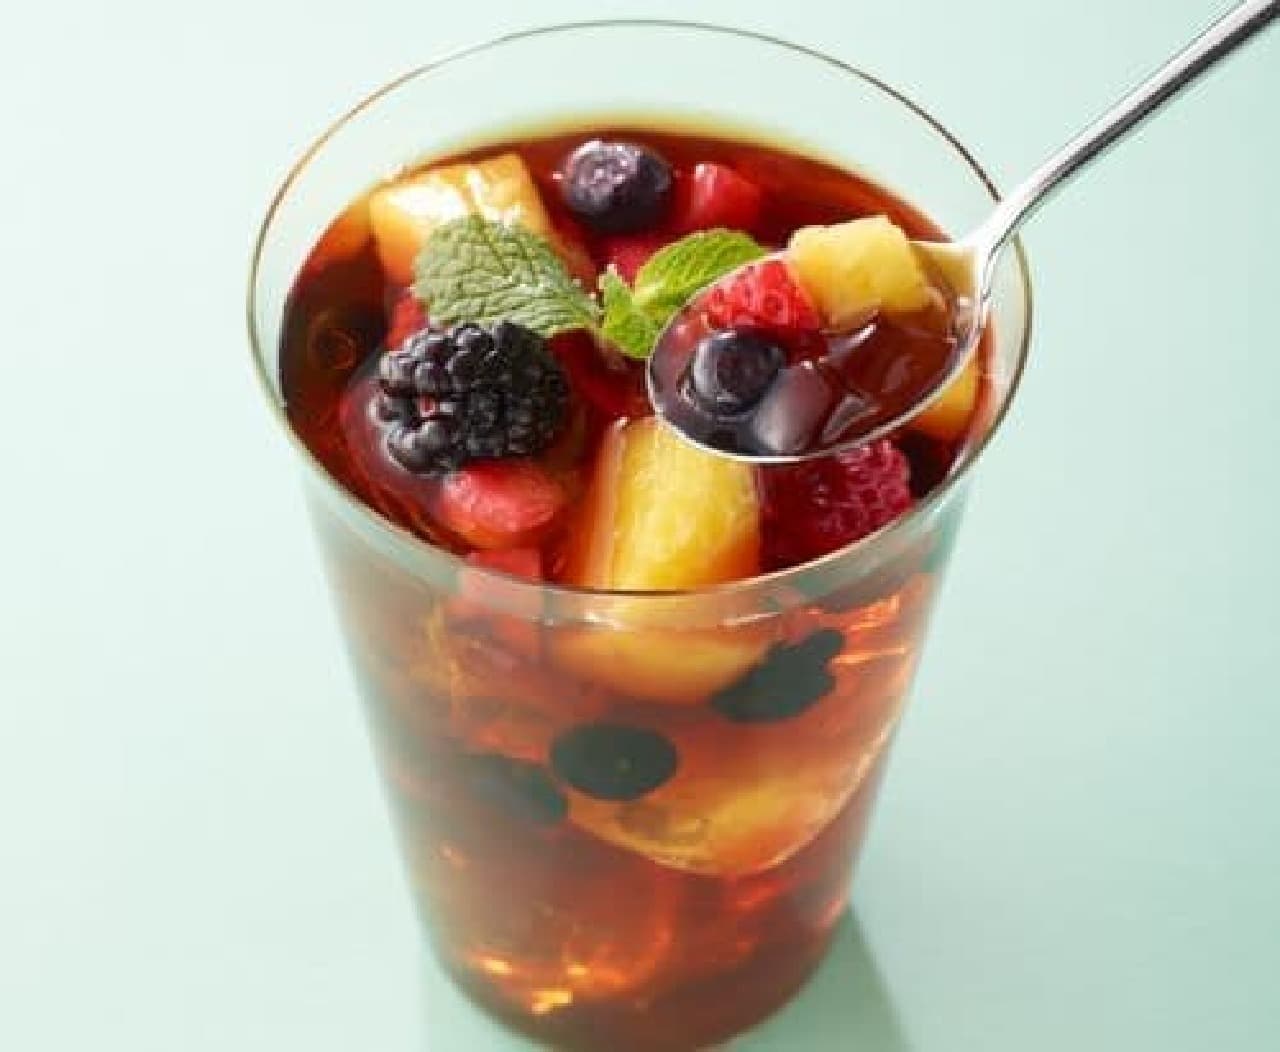 Excelsior Cafe "Mixed Berry & Pineapple Iced Tea"